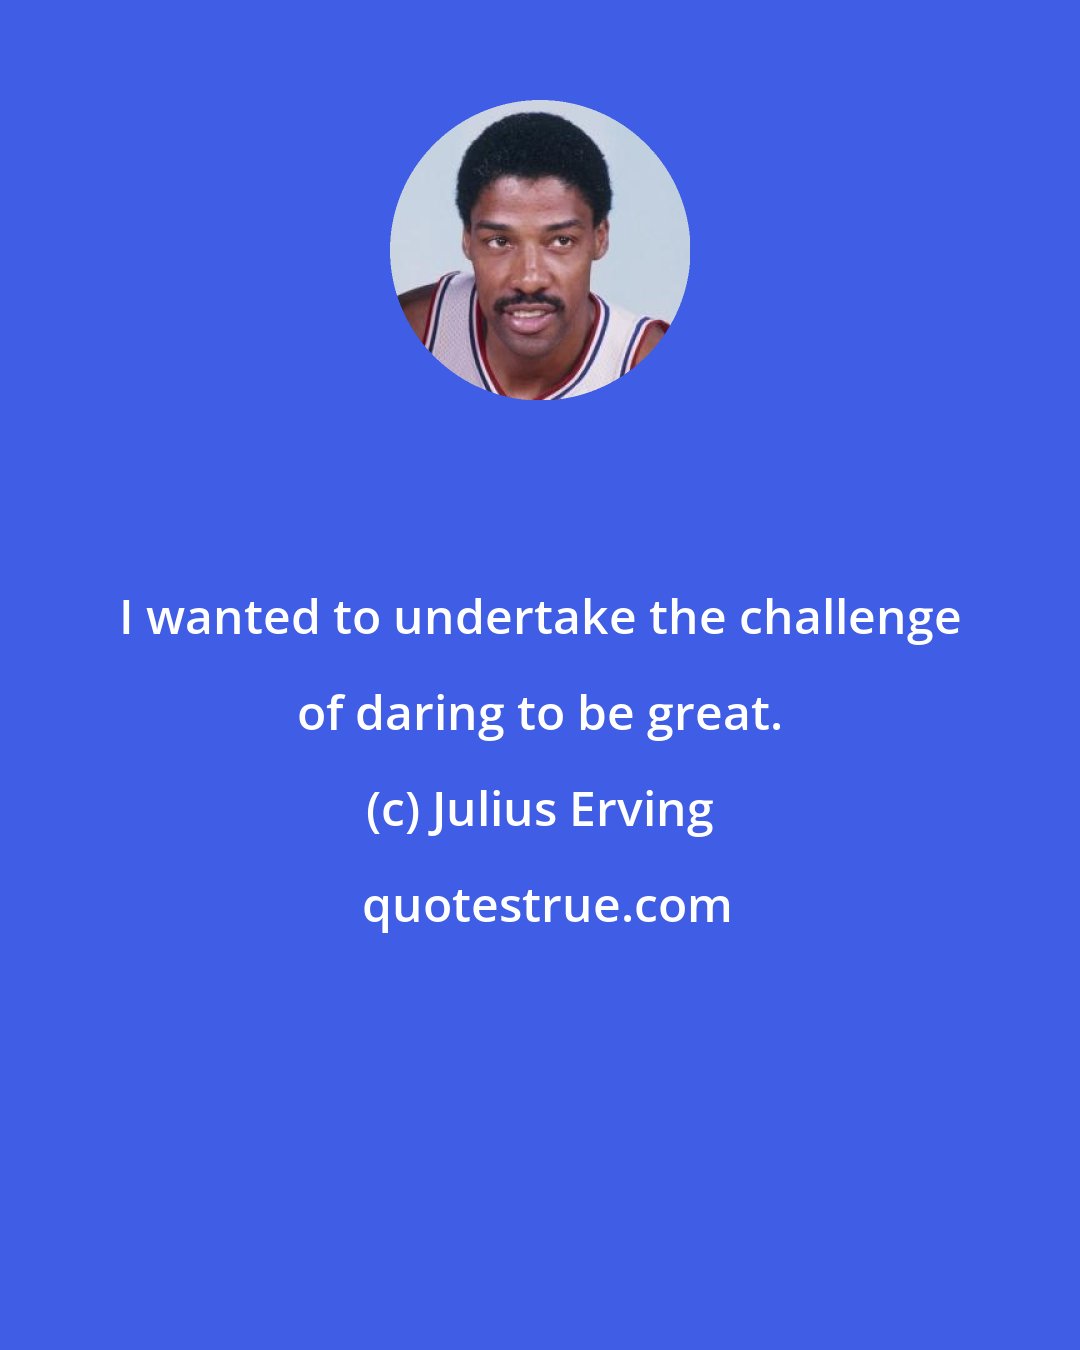 Julius Erving: I wanted to undertake the challenge of daring to be great.